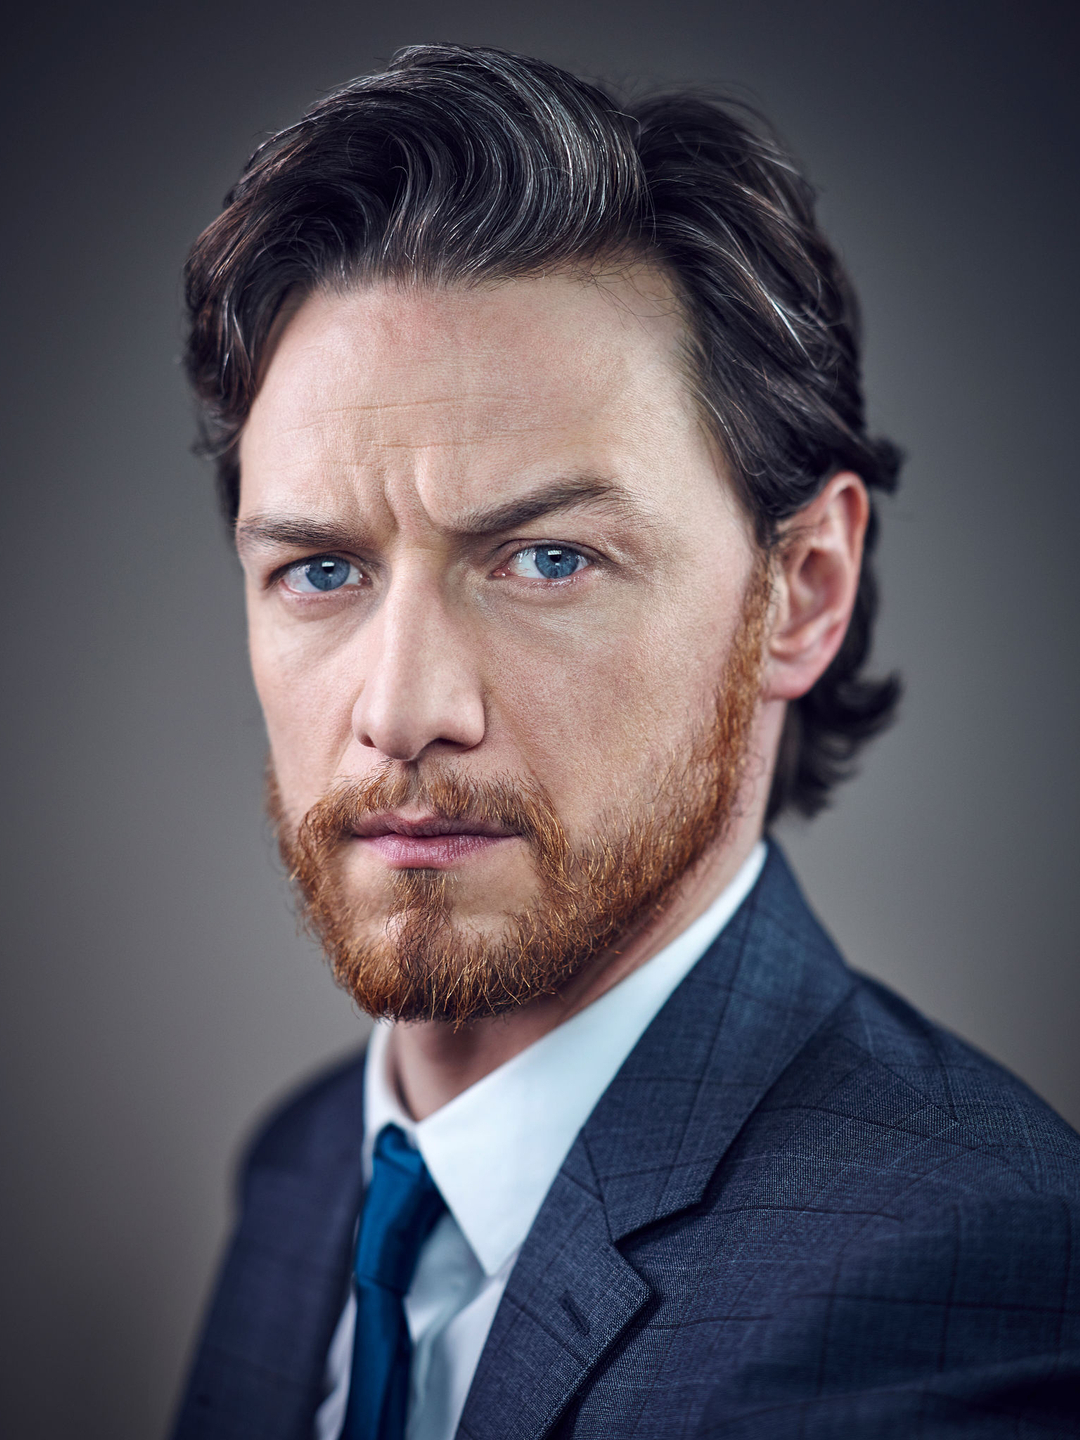 James McAvoy story of success